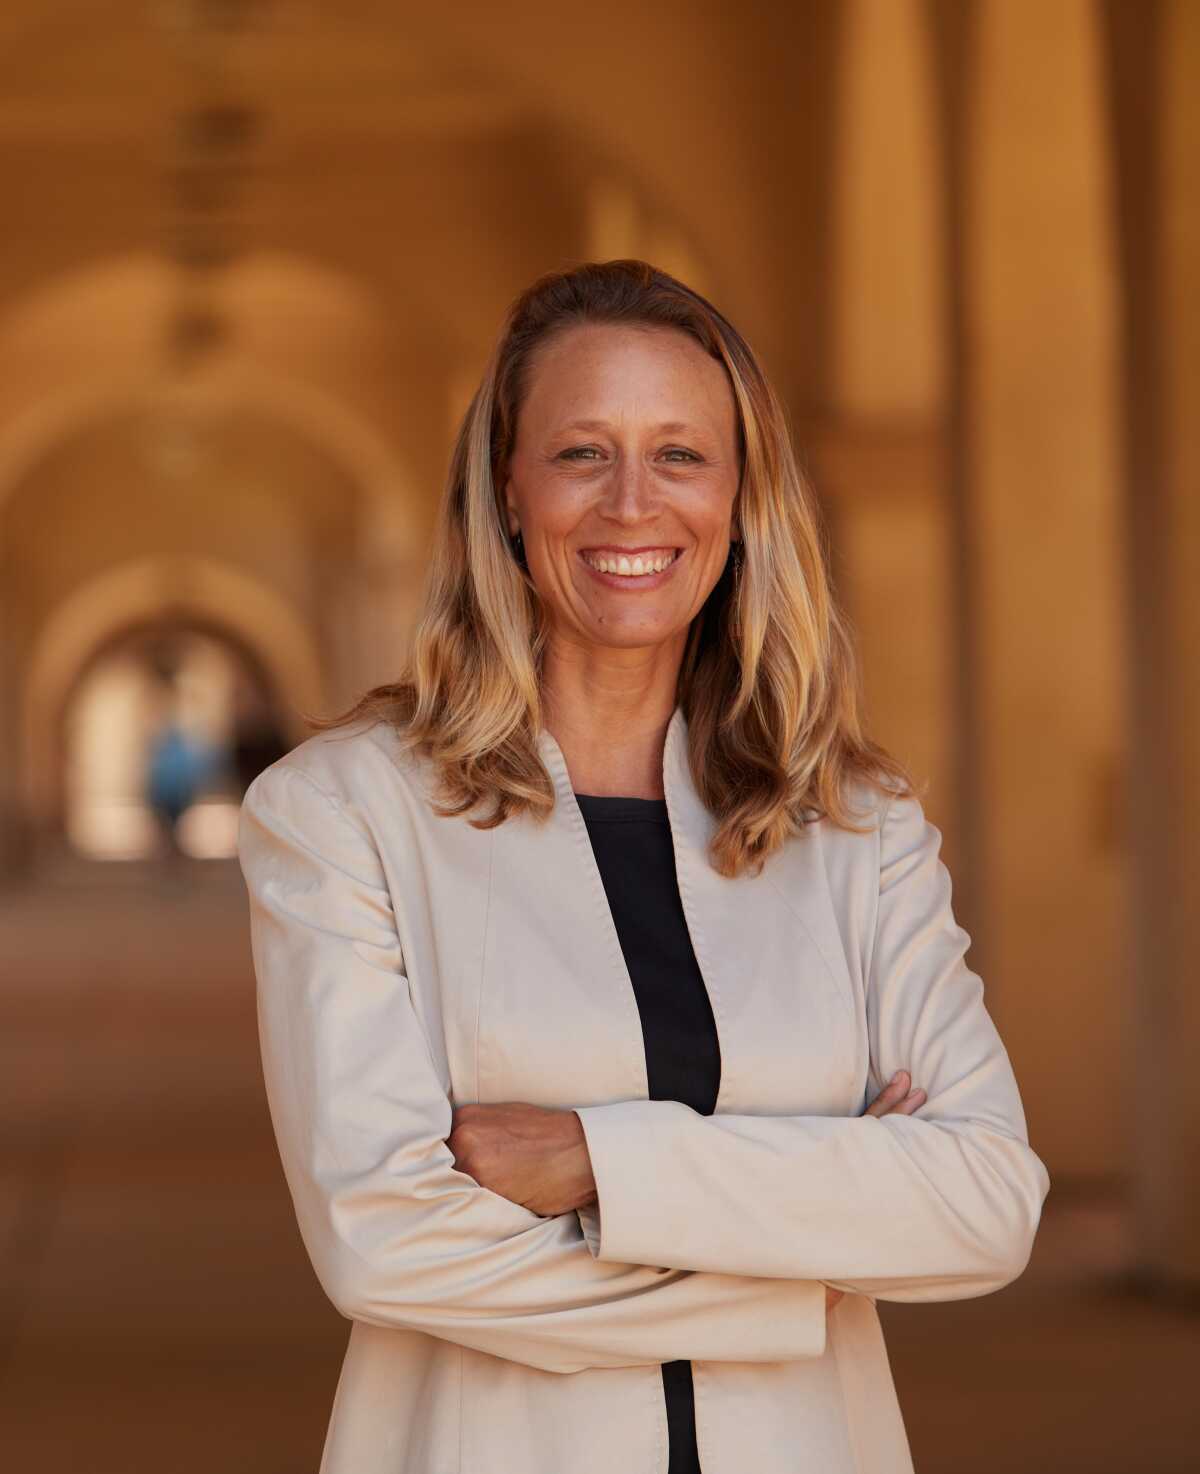 San Diego County Supervisor Terra Lawson-Remer will hold a meet-and-greet on Sept. 19 at the La Jolla Community Center.